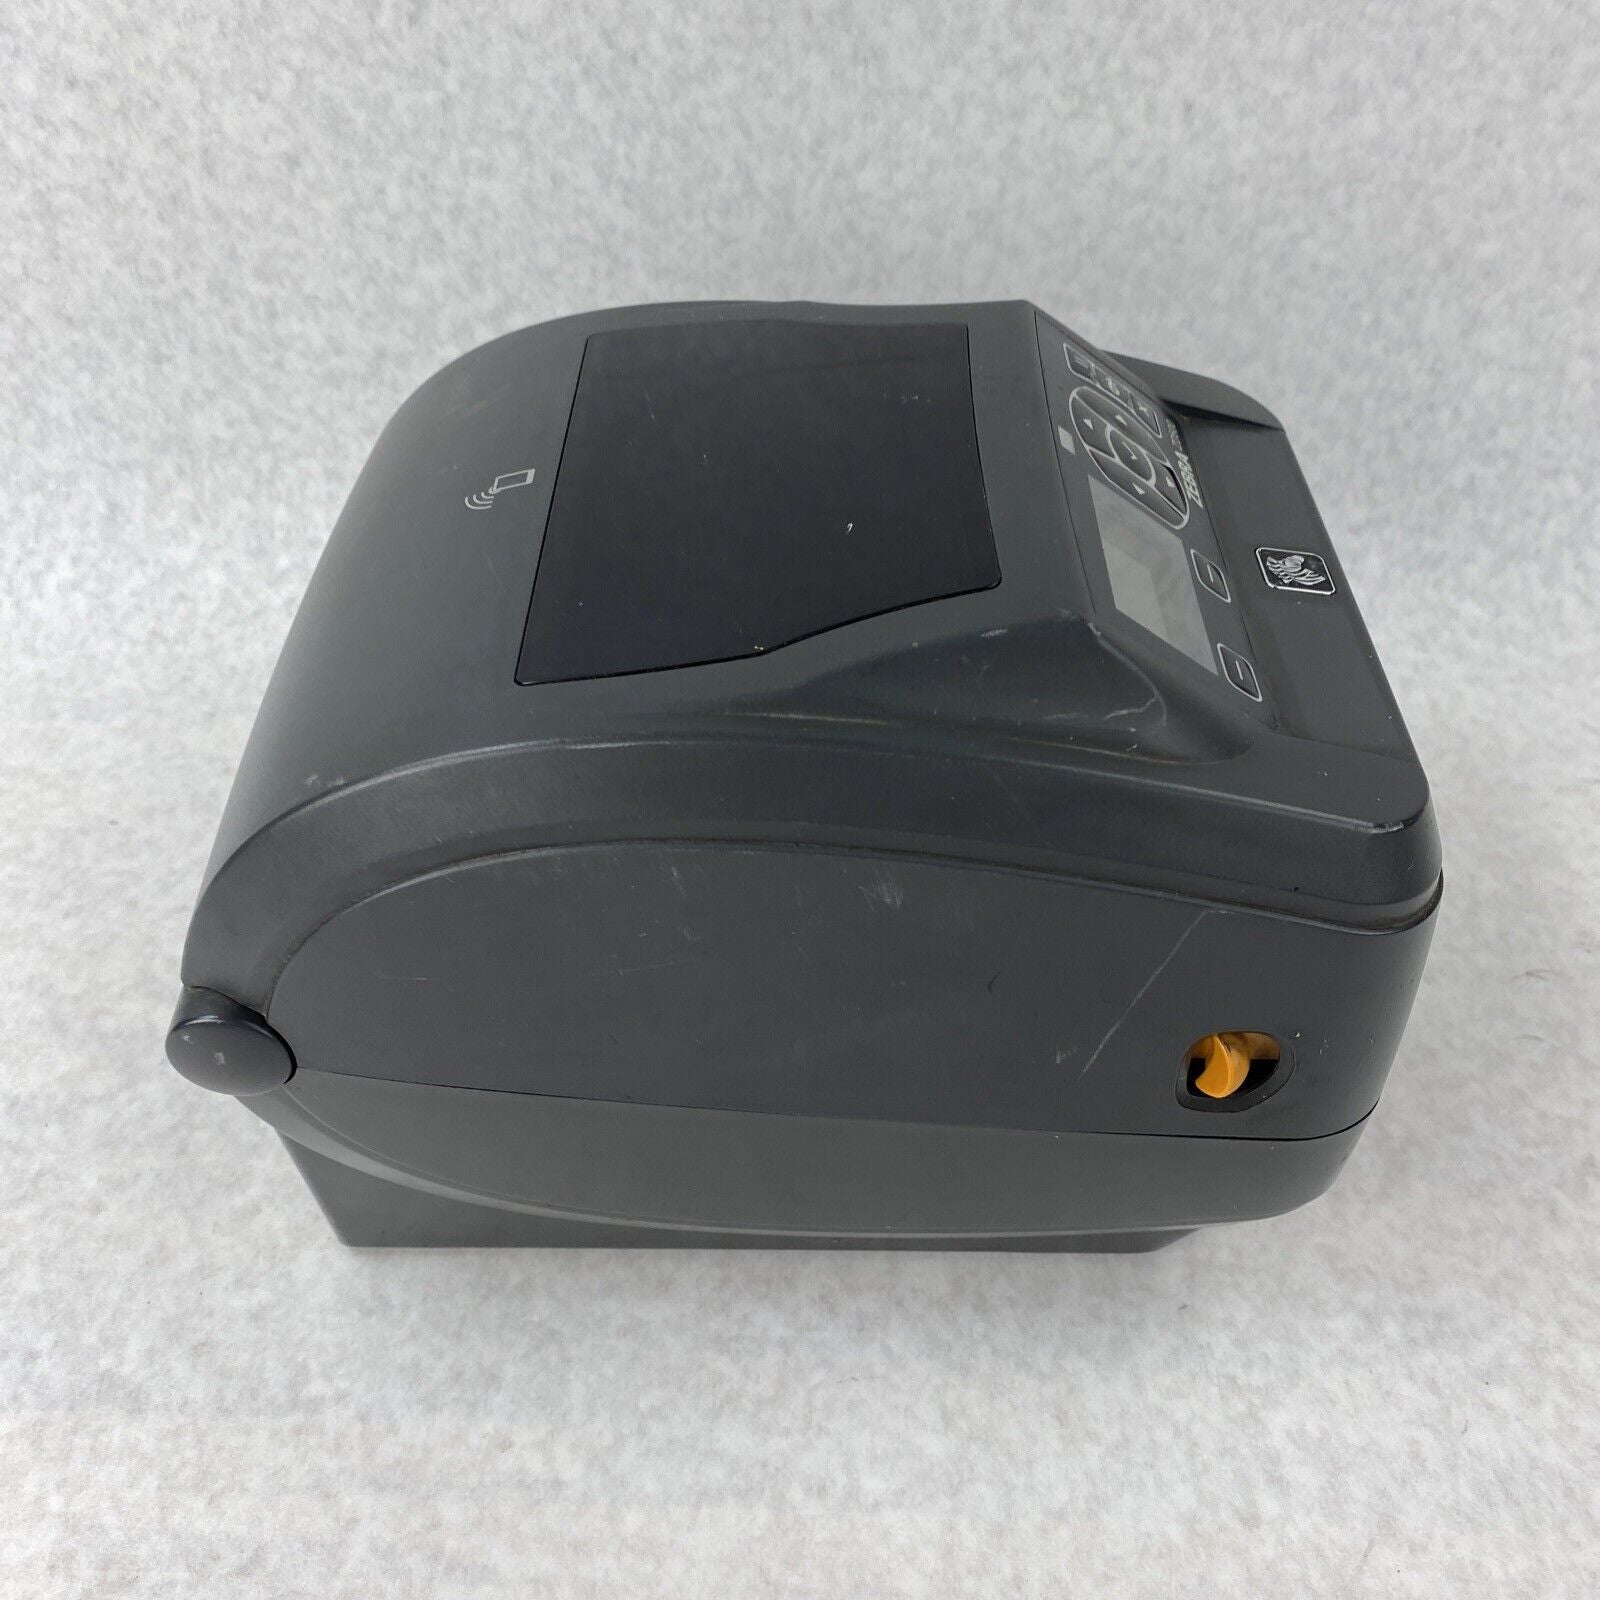 Zebra ZD500 Label Barcode Printer - For Parts or Repair